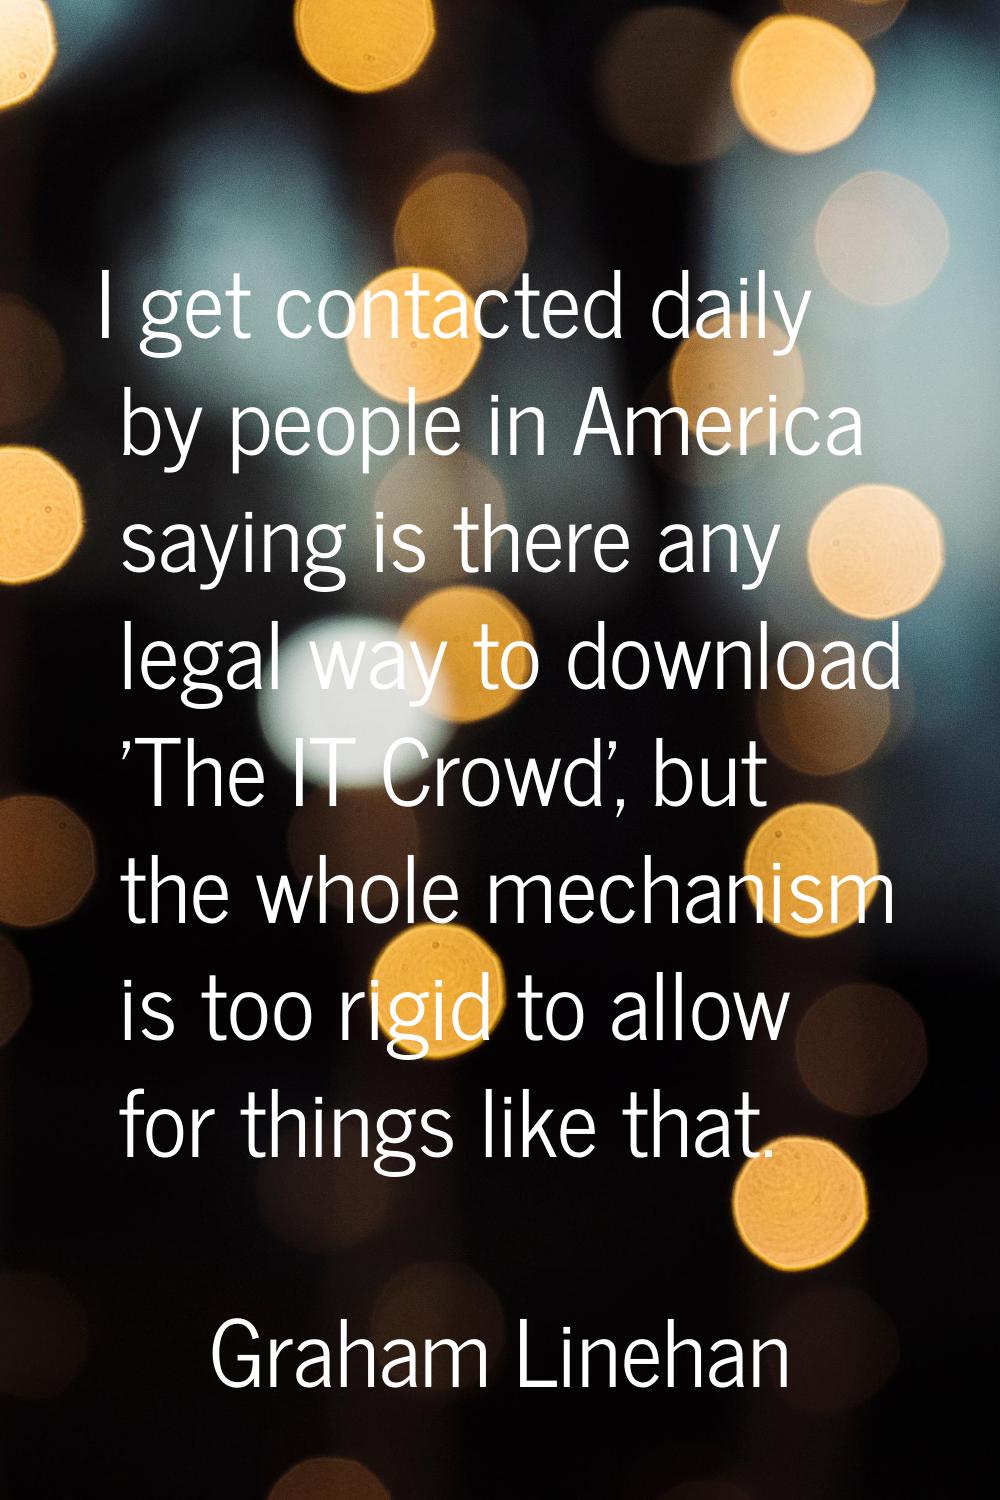 I get contacted daily by people in America saying is there any legal way to download 'The IT Crowd'